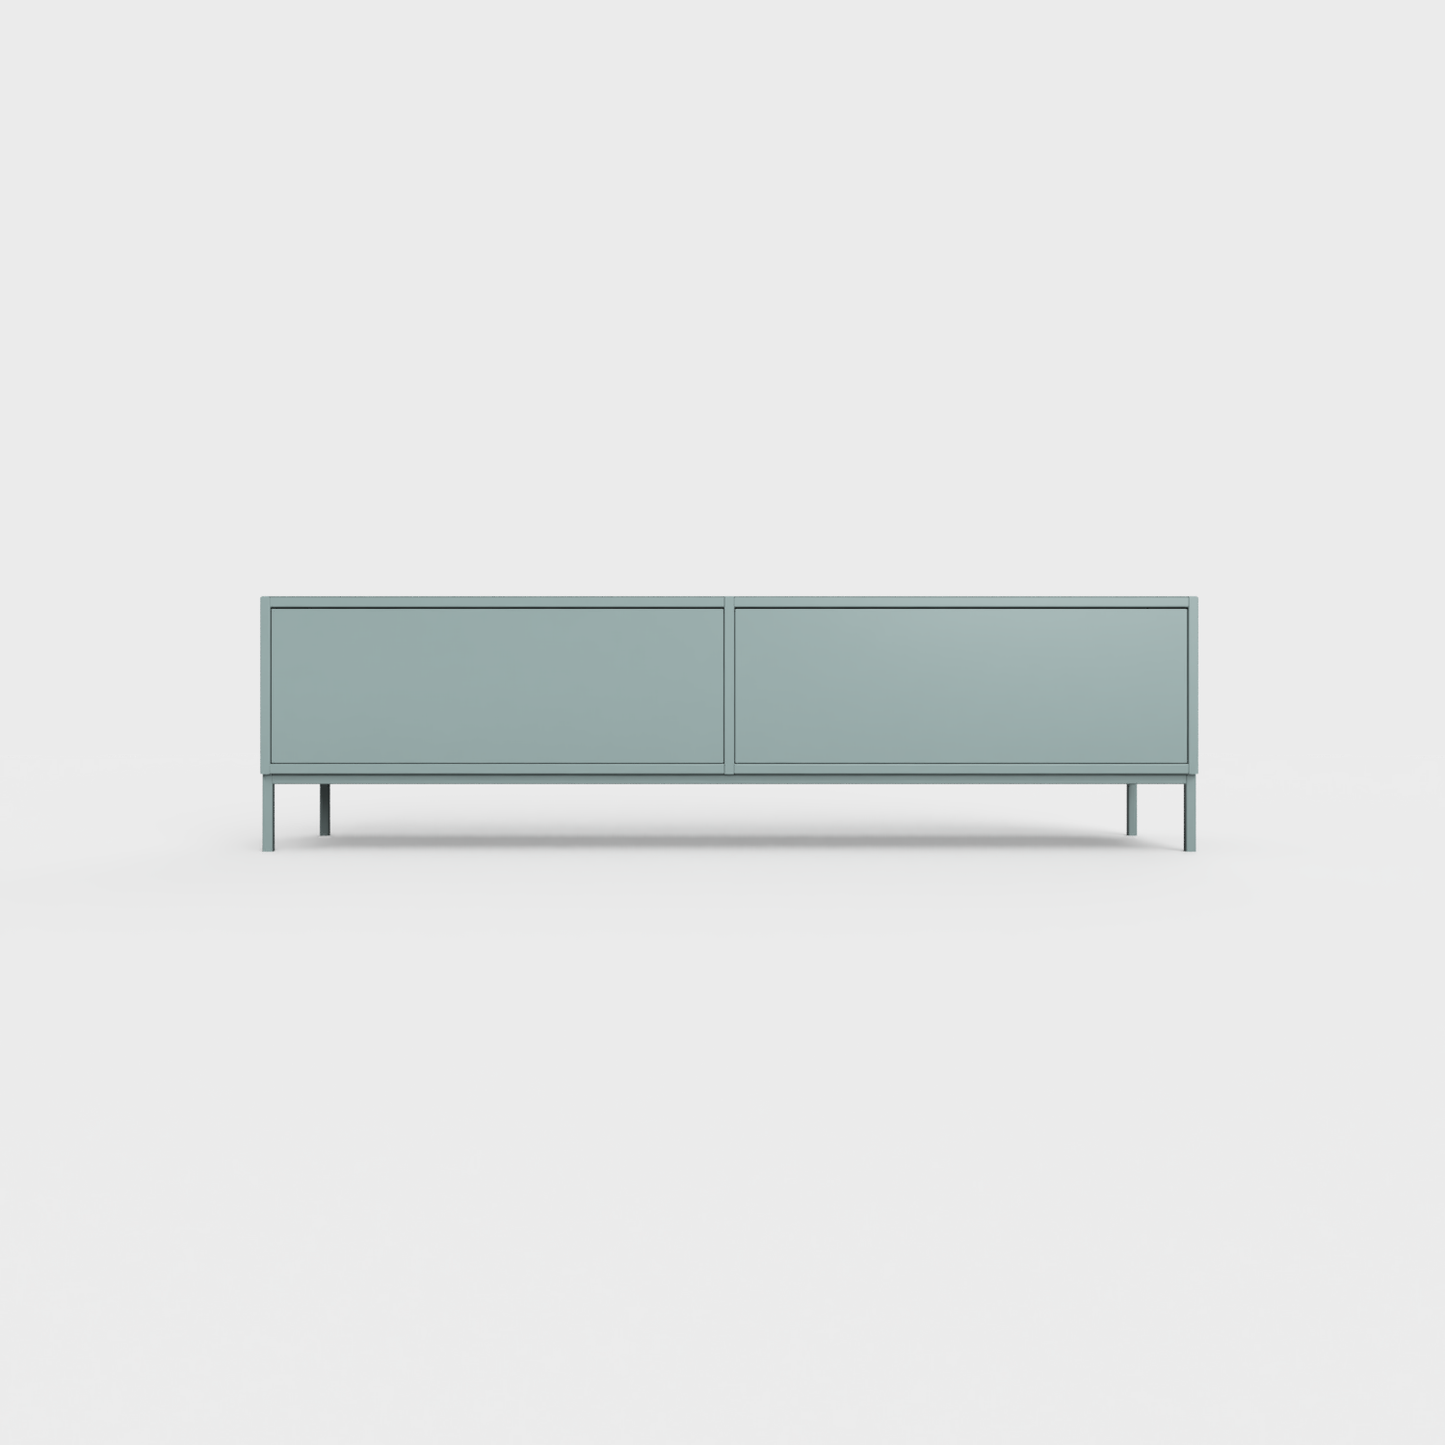 Prunus 01 Lowboard in Celadon Green color, powder-coated steel, elegant and modern piece of furniture for your living room